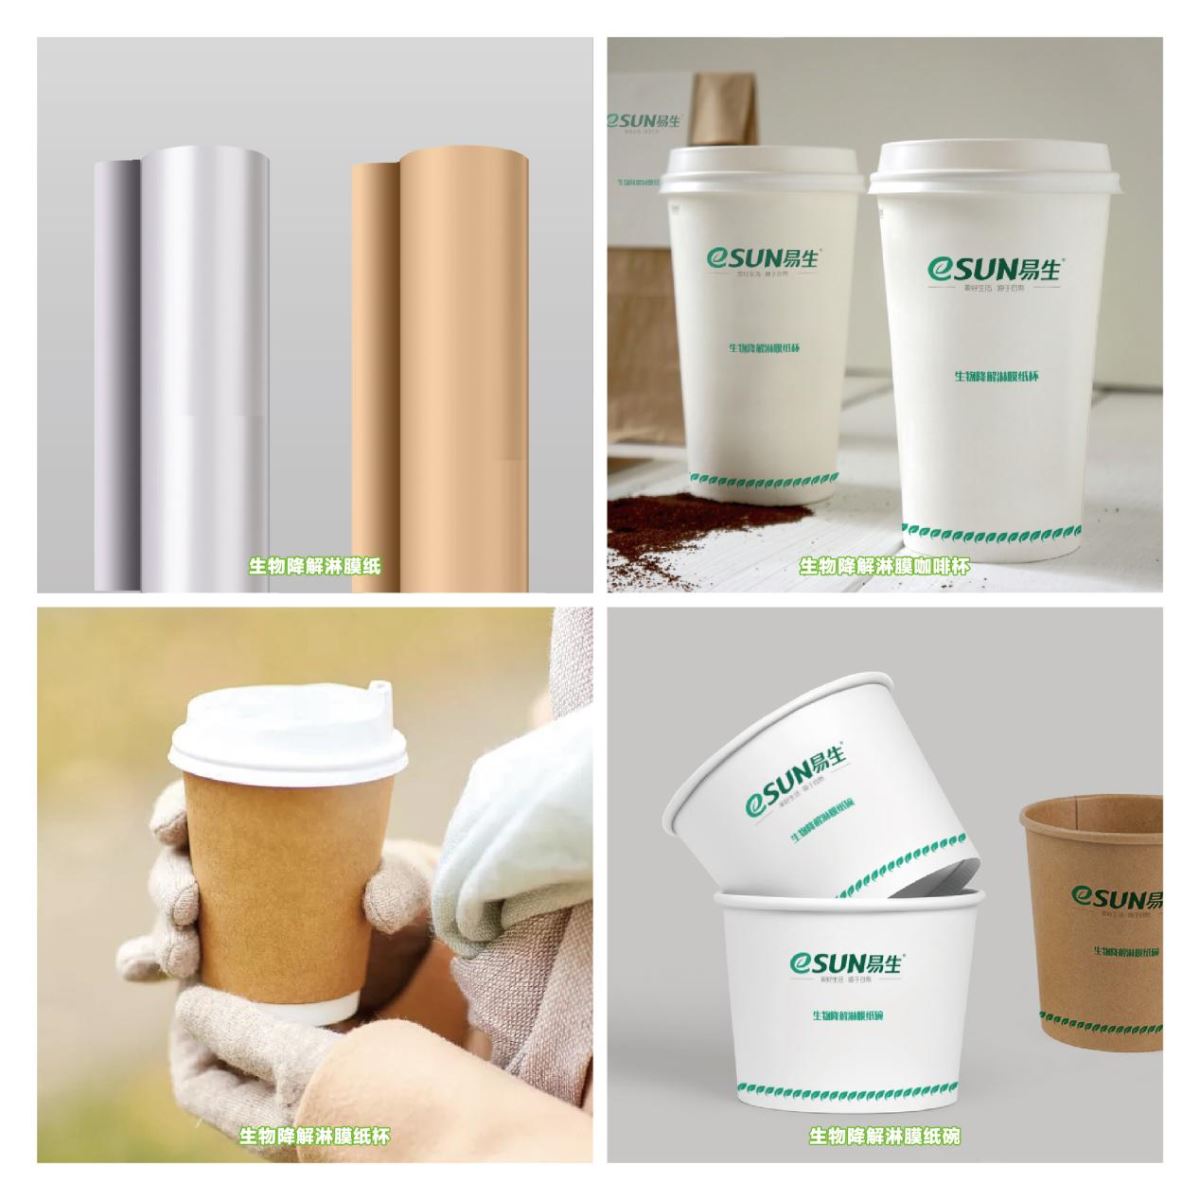 Biodegradable coated paper and products